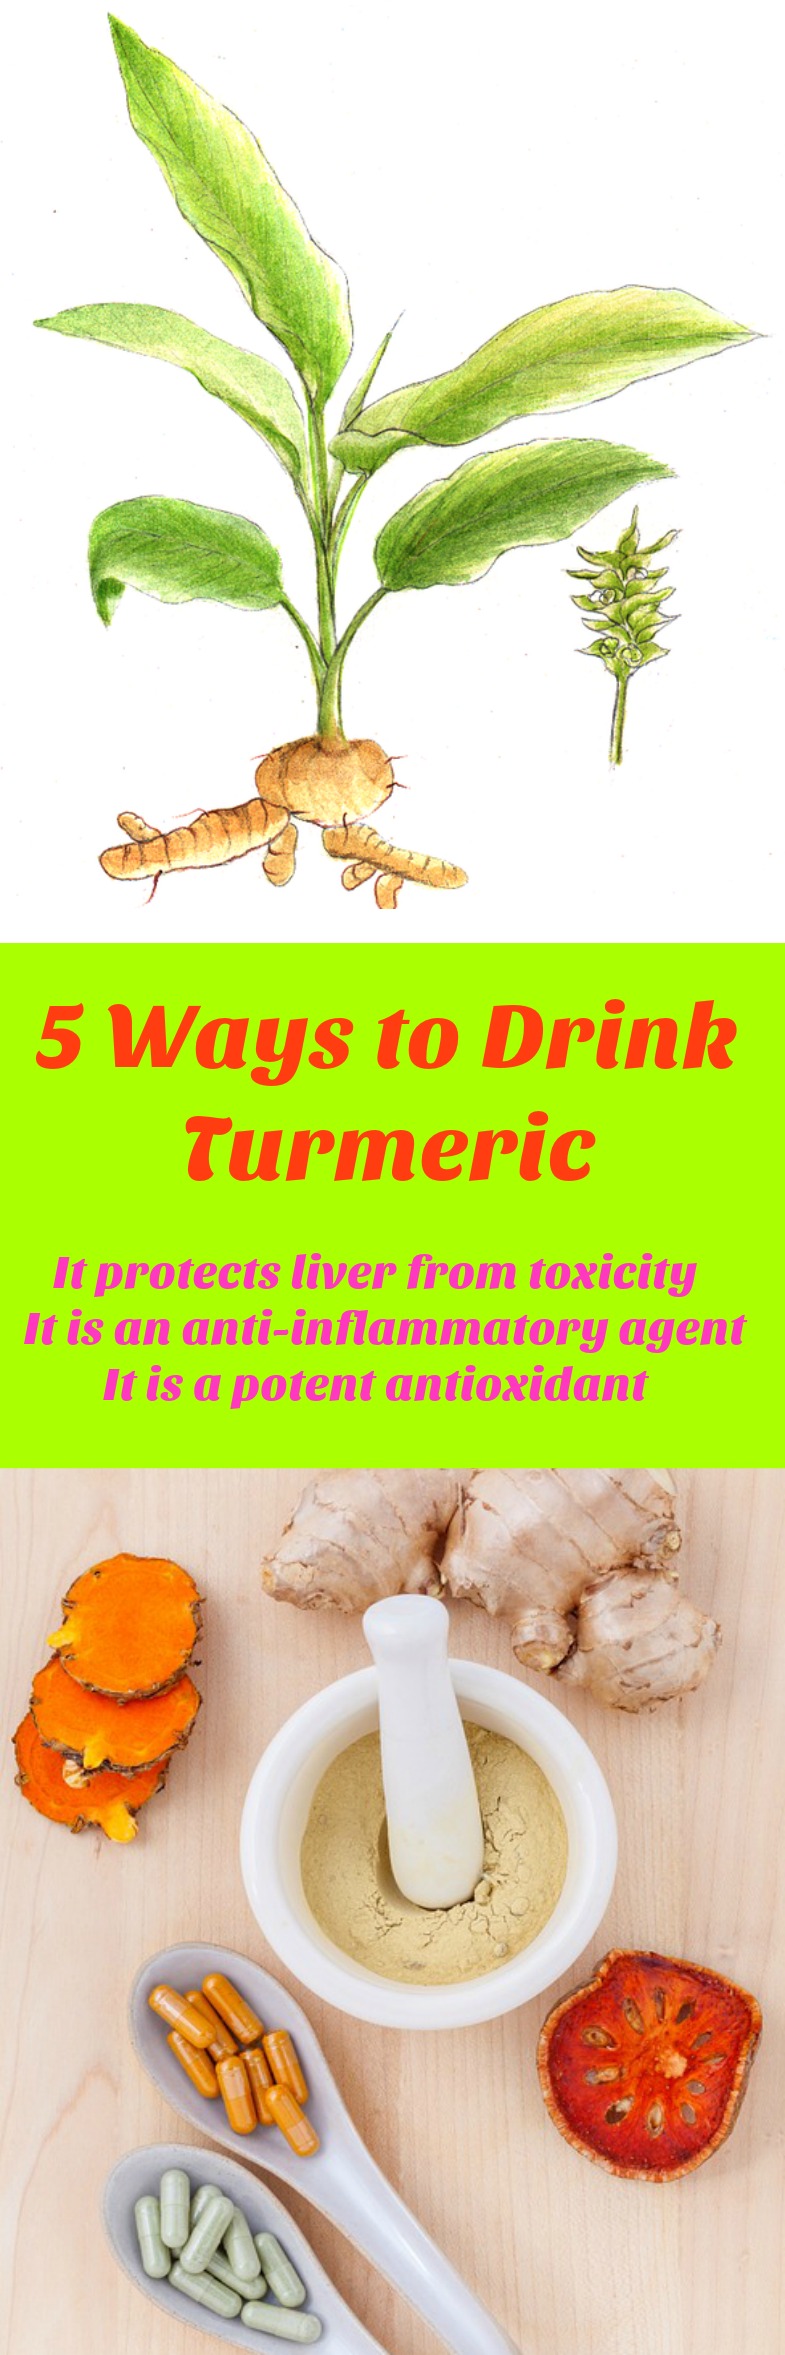 5 Ways to Drink Turmeric. Learn how to detox your liver, reduce inflammation and up your metabolism with one of the 5 detox drinks with proven results. Challenge yourself with these Amazing tasteful drinks.